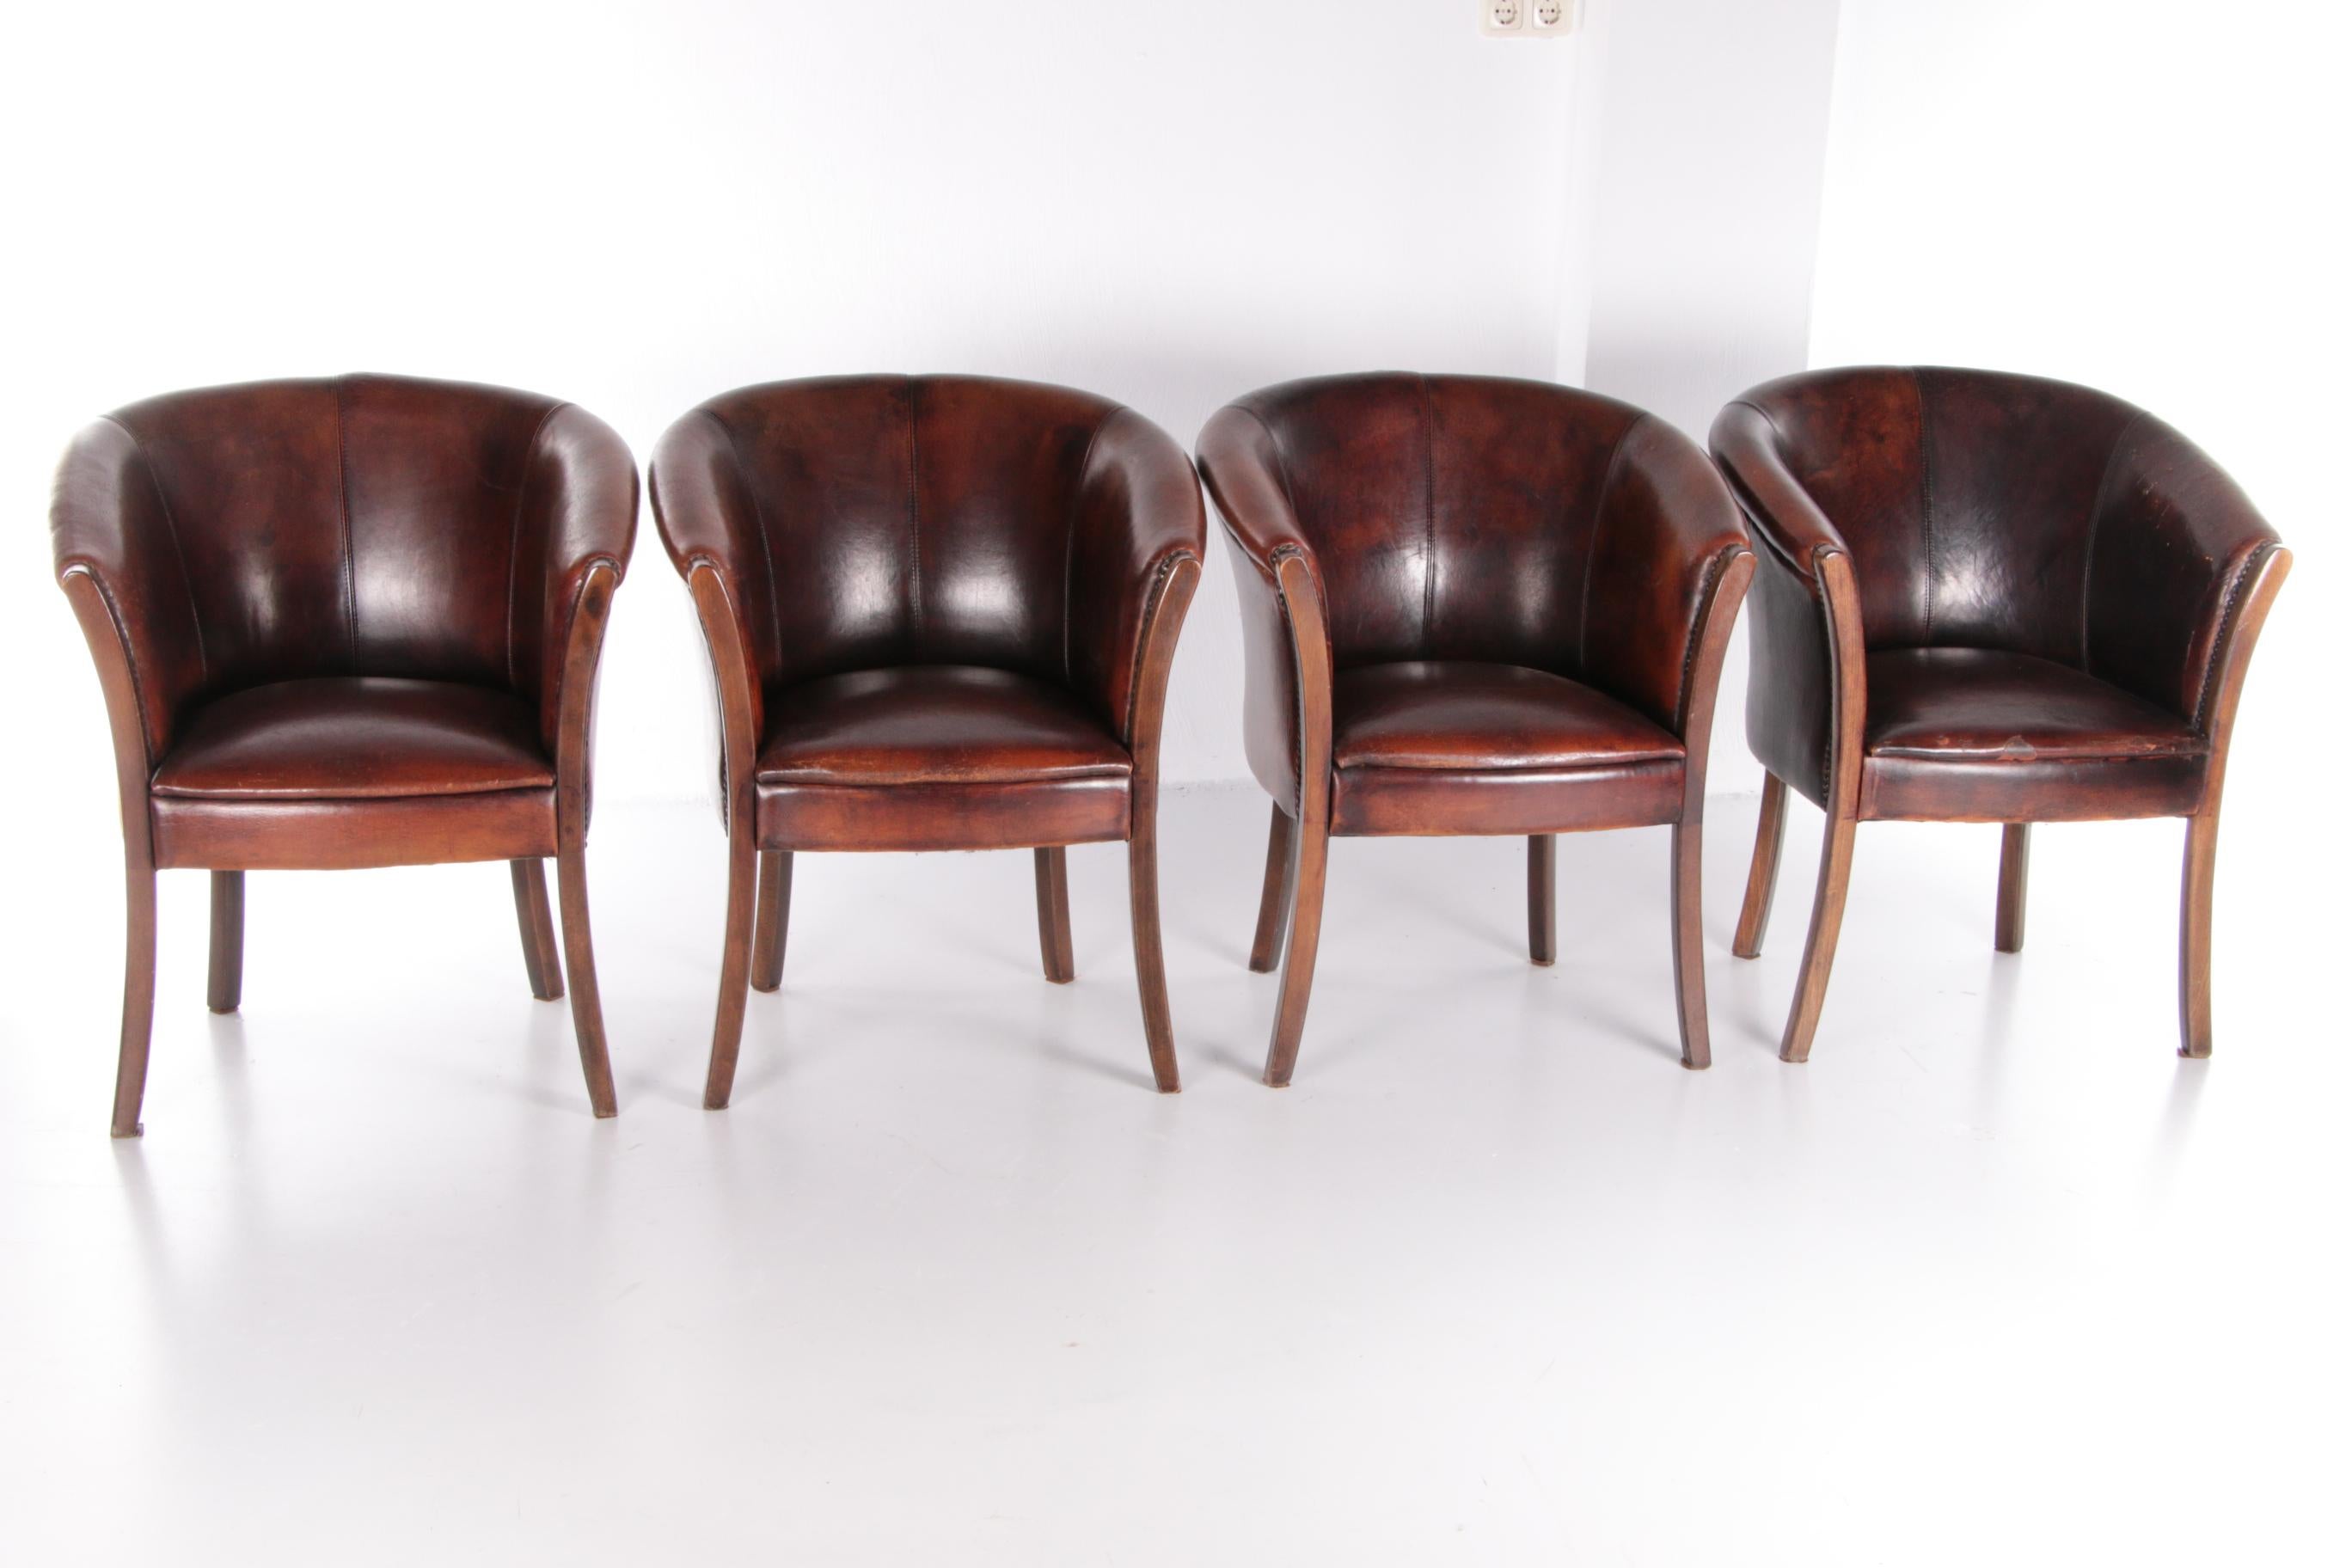 Dutch Set of 4 Sheep Leather Dining Table Chairs, 1970, Netherlands